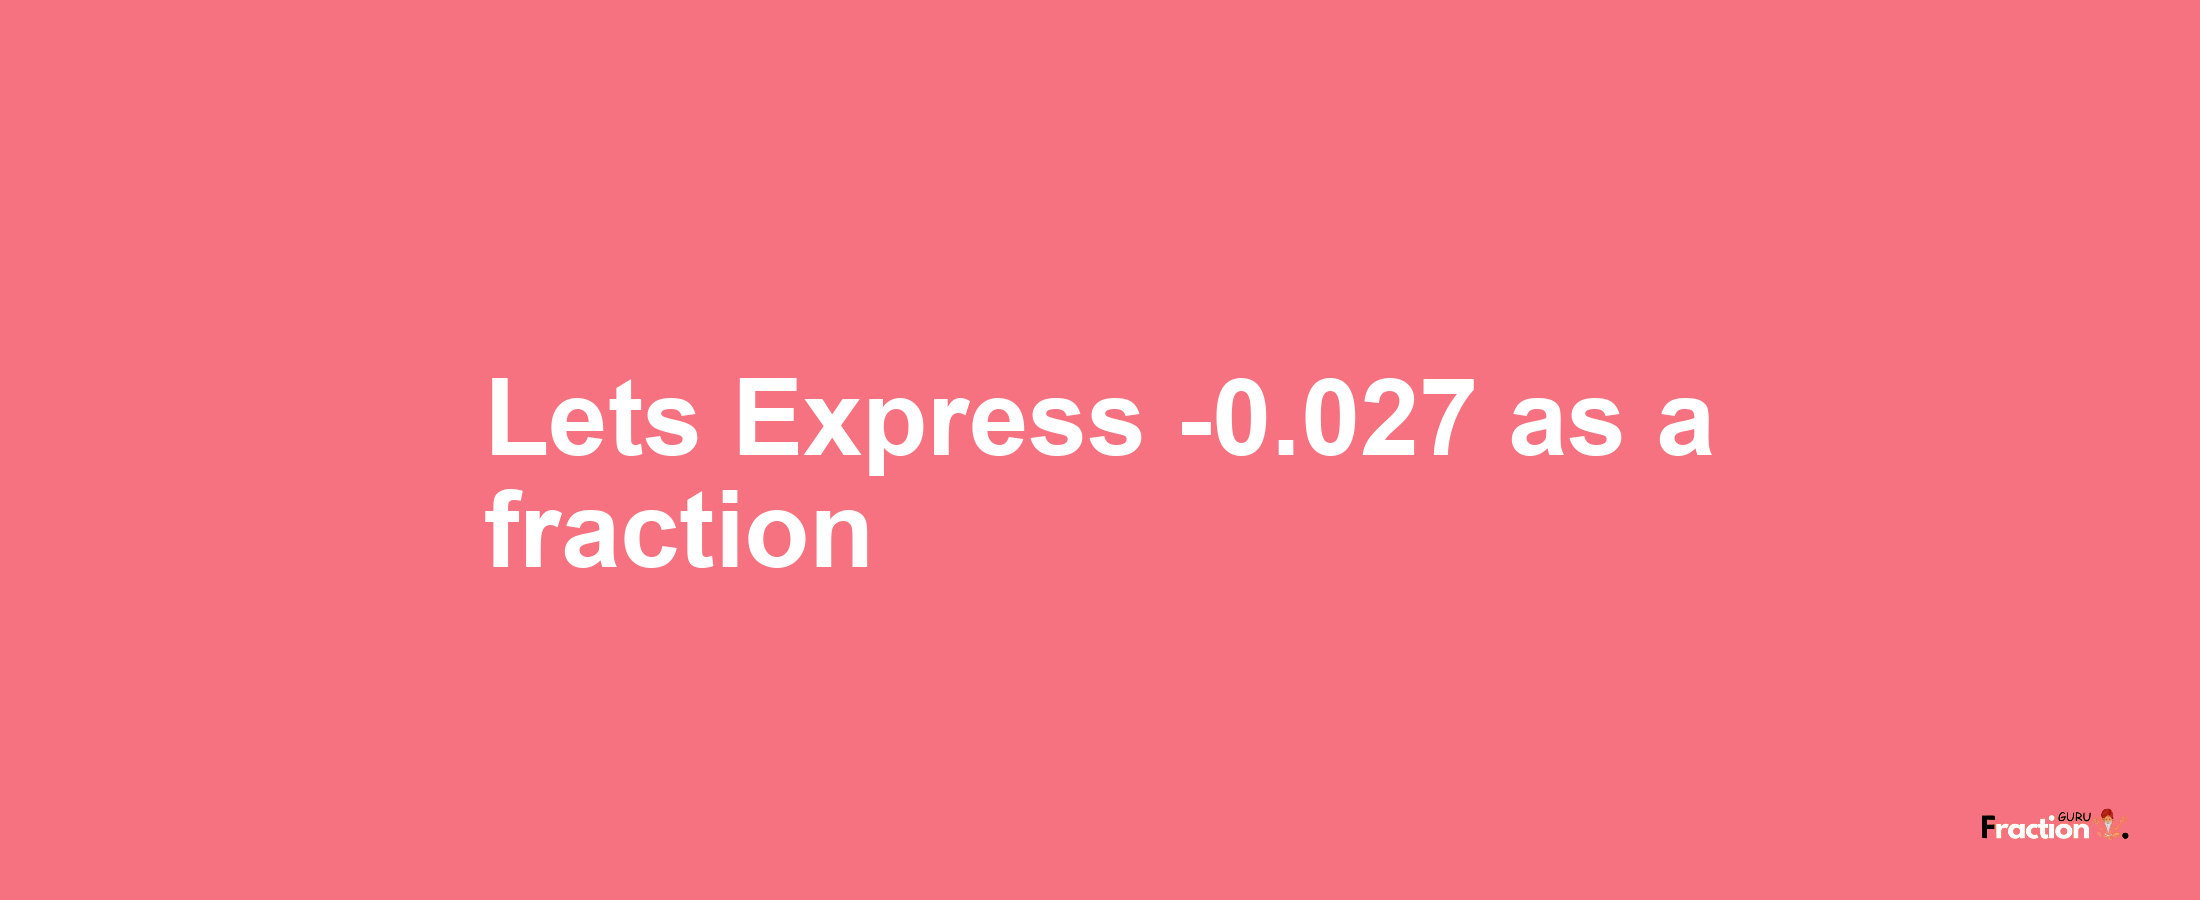 Lets Express -0.027 as afraction